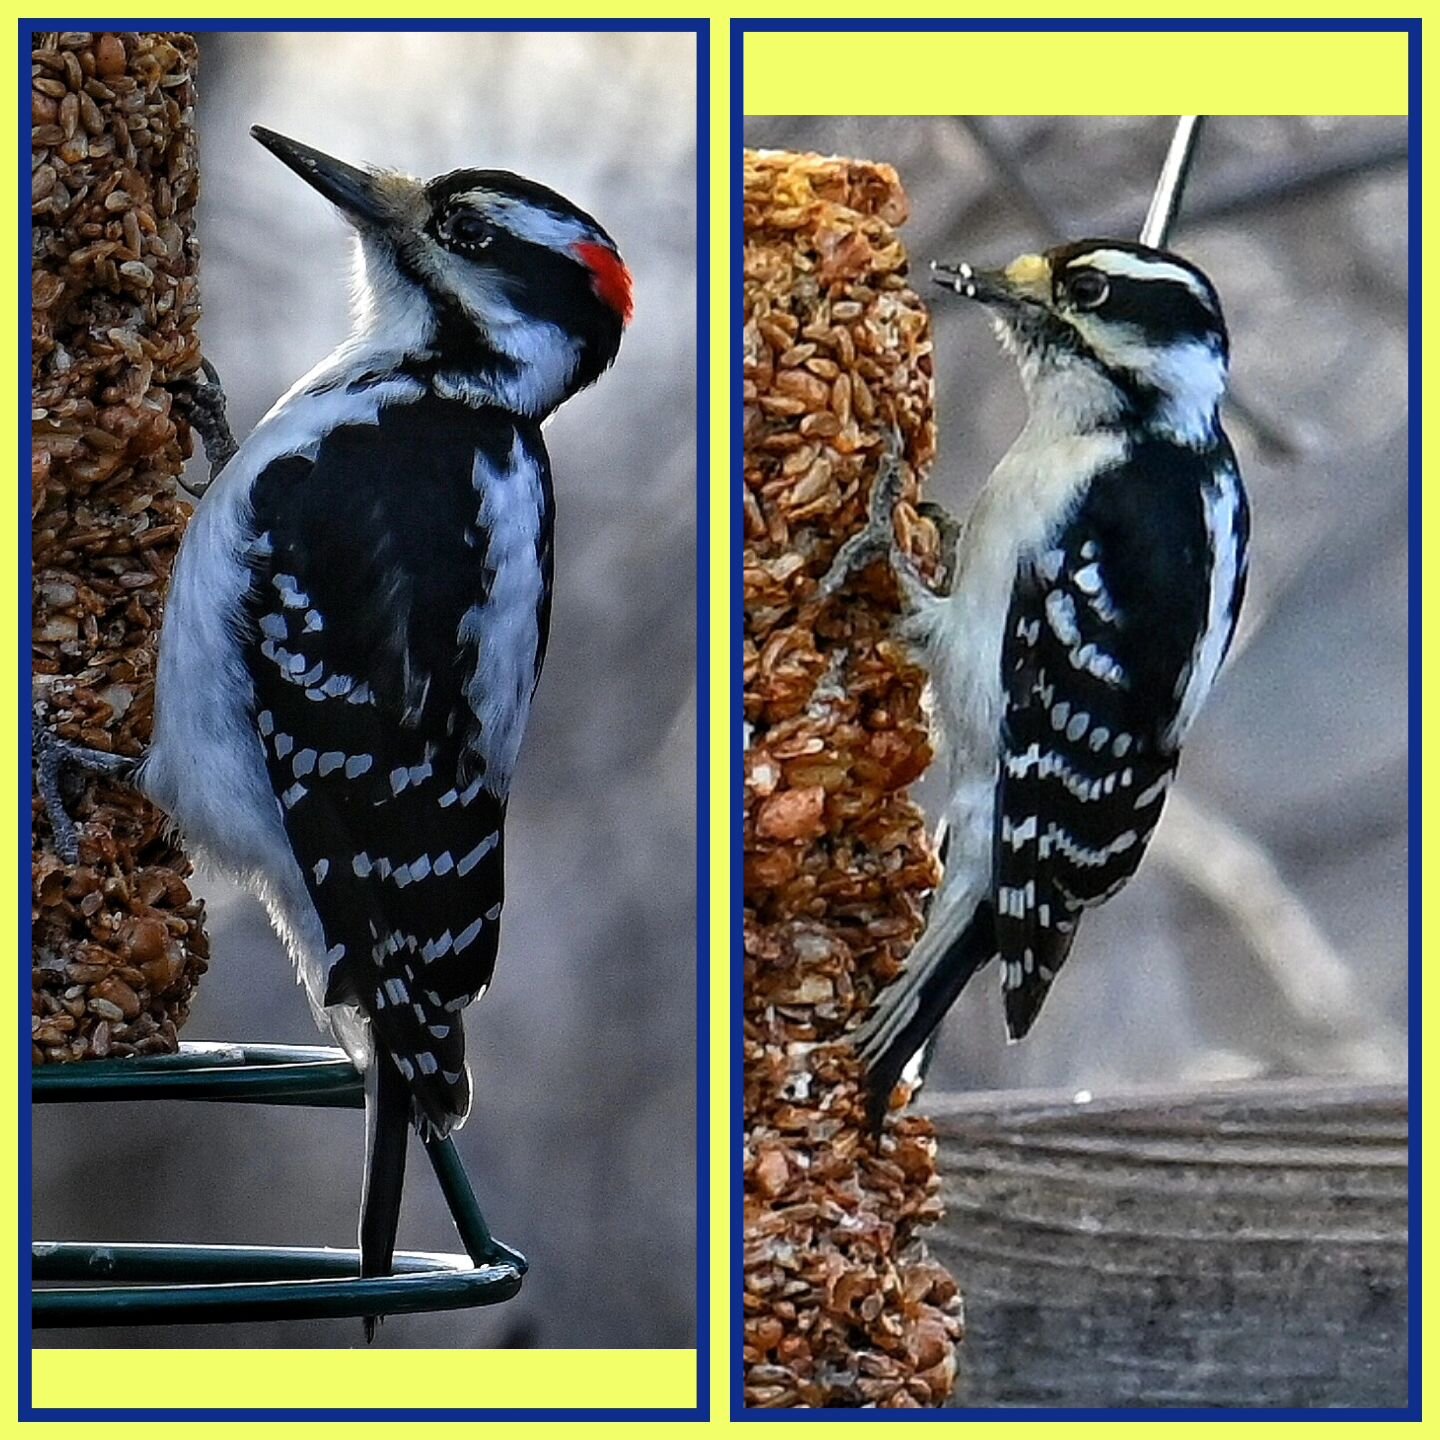 🏡 On this Feeder Friday, we examine the easiest- to-observe field marks that distinguish the impressive Hairy Woodpecker (left) from the  charming Downy Woodpecker (right). 
Most noticeable is the larger overall size of the Hairy Woodpecker, and its